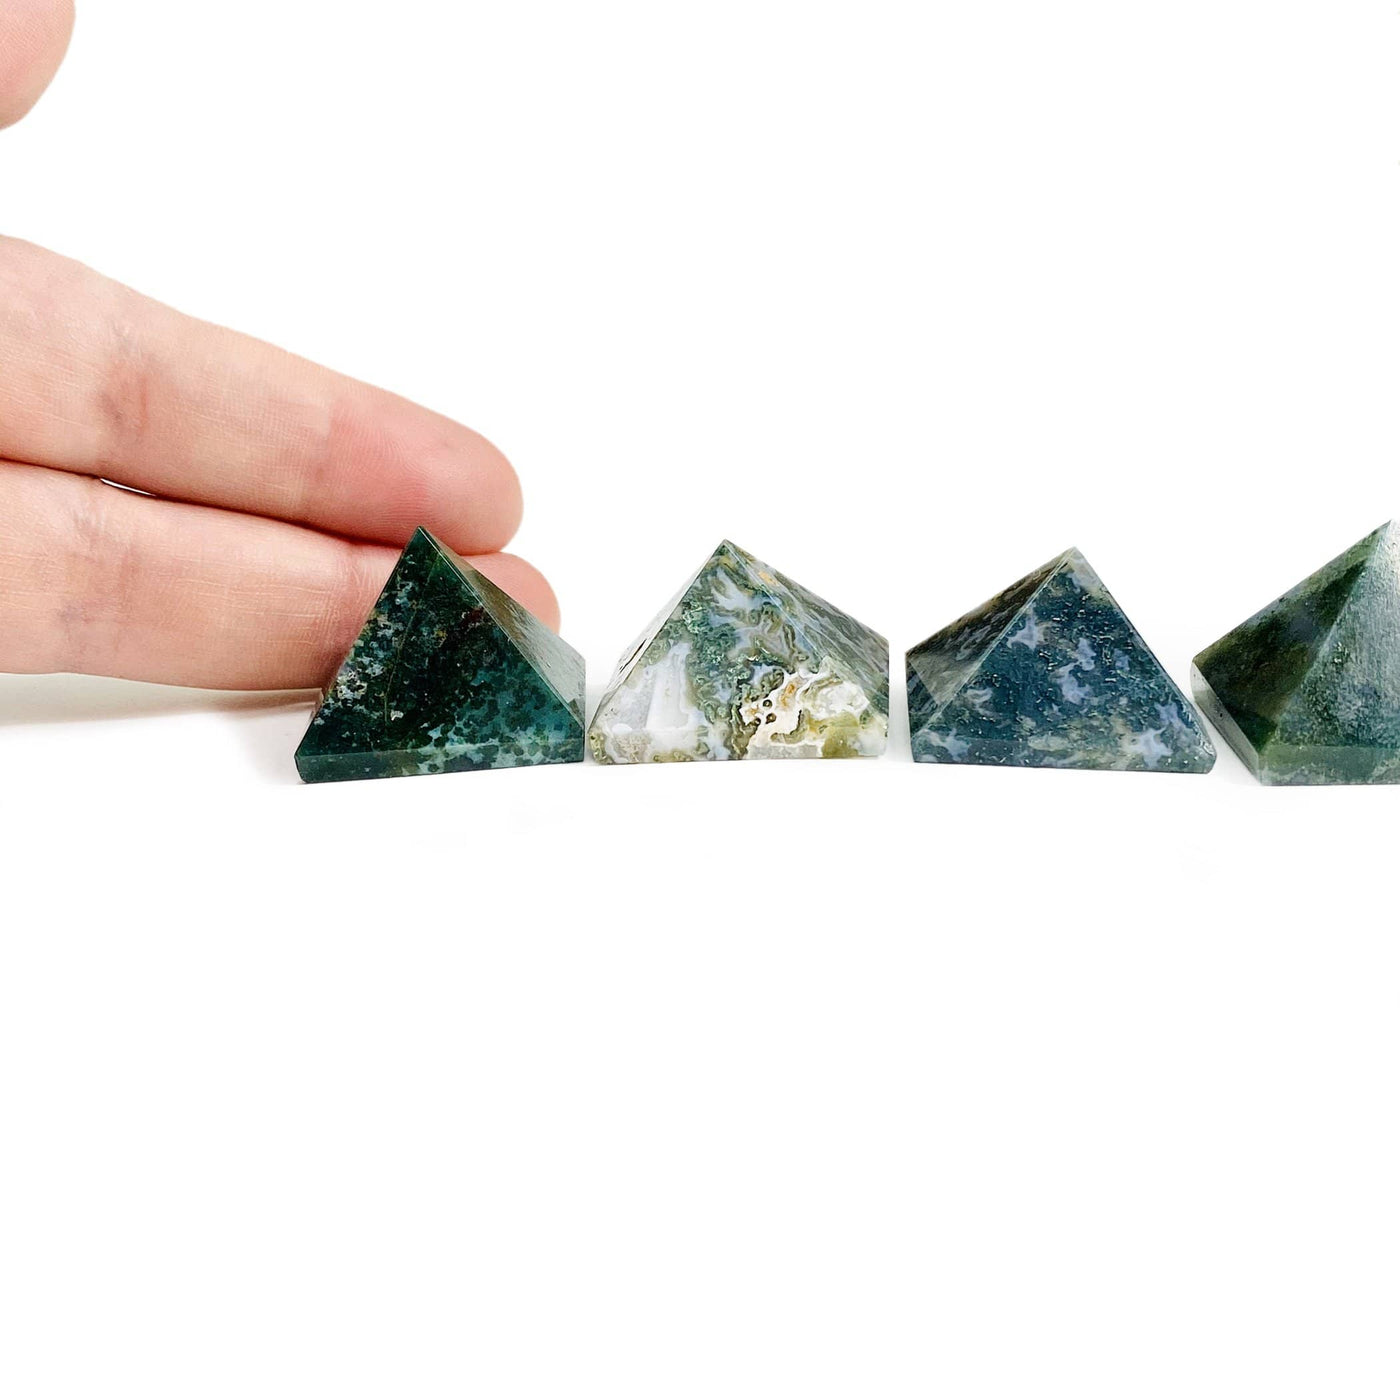 Moss agate assorted pyramids on a white background.  